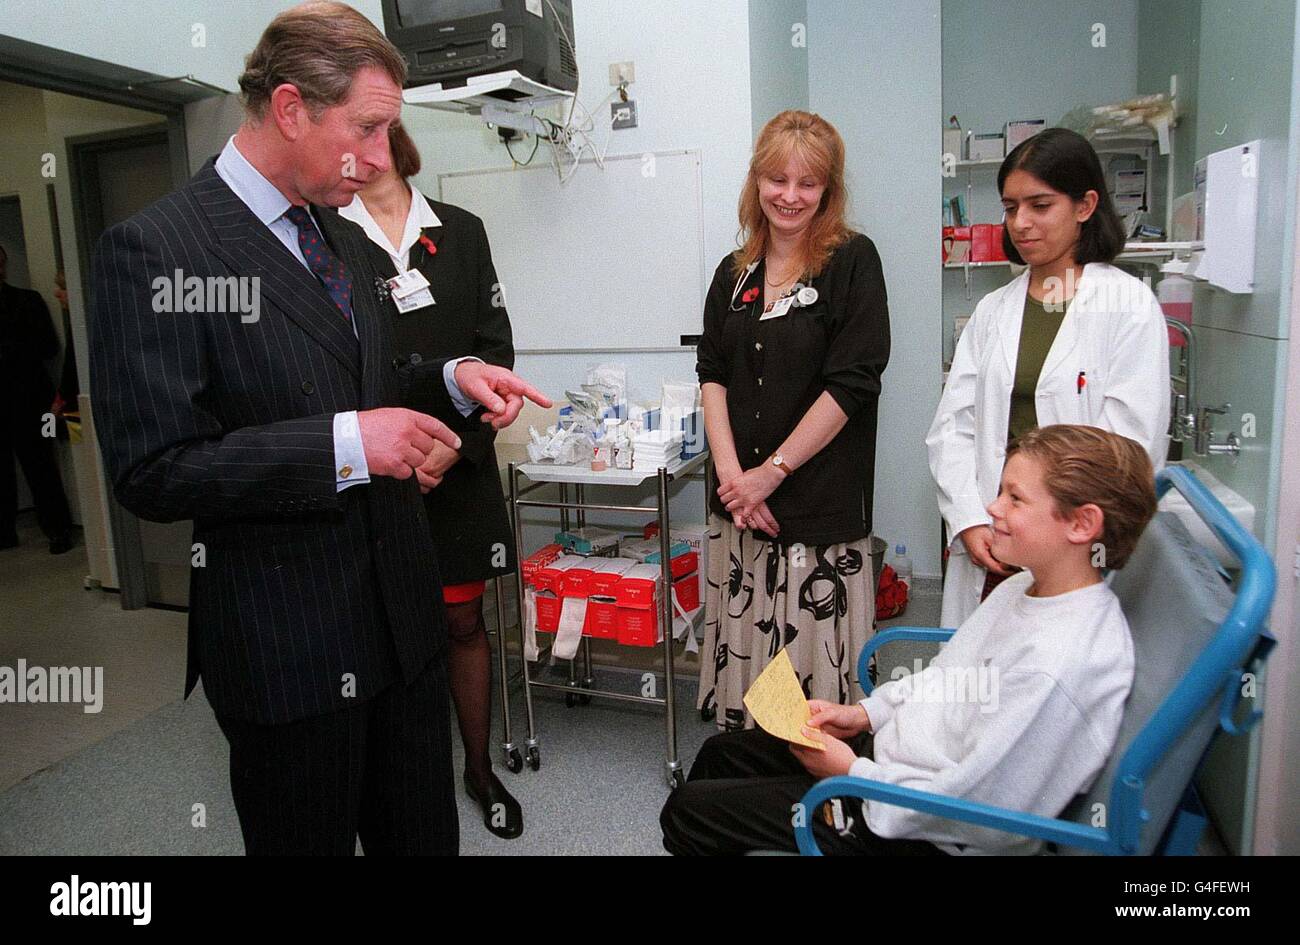 Prince Charles greets Scott Smith, aged 9 from Forest Hill in London as he opens the re-developed Accident and Emergency and Radiology Departments at King's College Hospital today (Wednesday). Pool photo from Evening Standard. Stock Photo